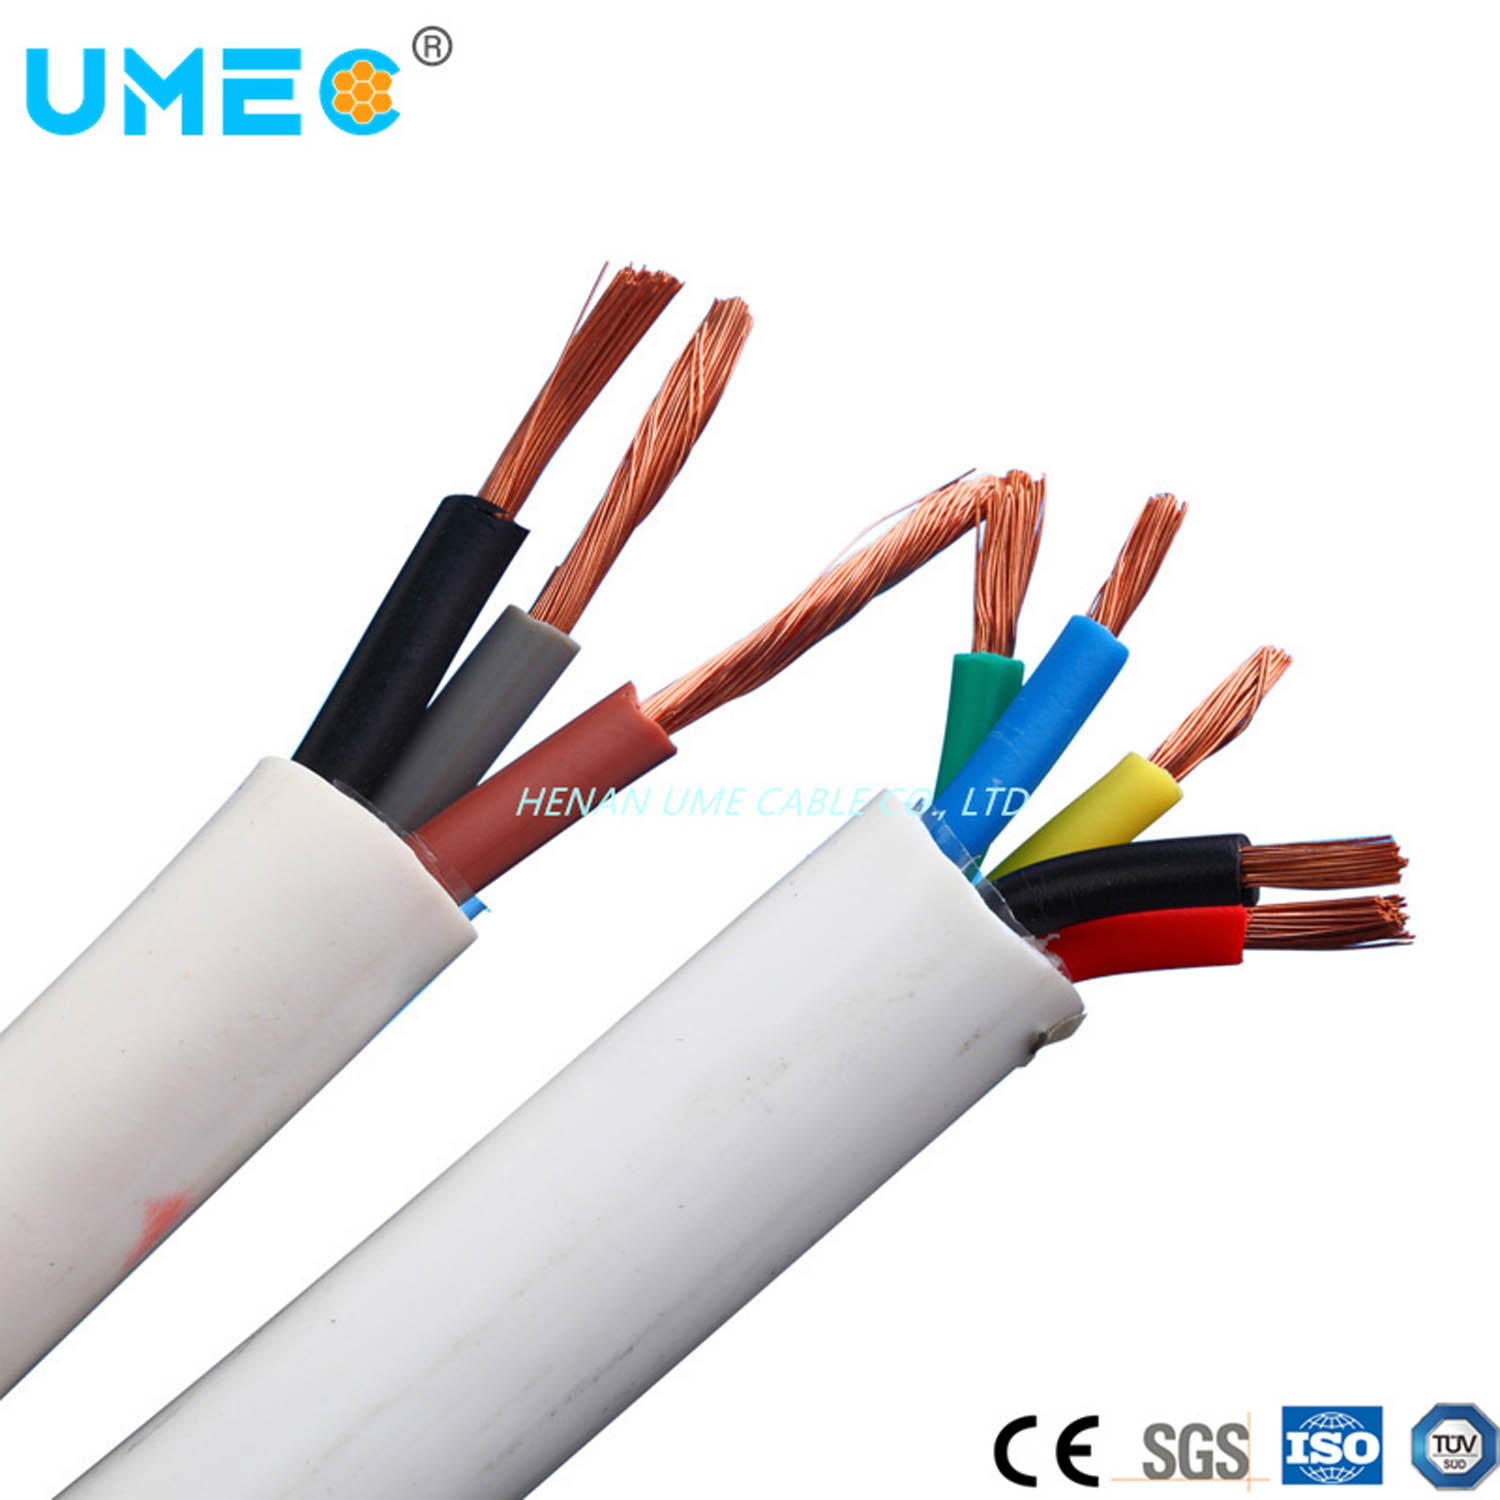 450V/750V 5 Core 4mm Rubber Insulated Flexible Electric Power Cable